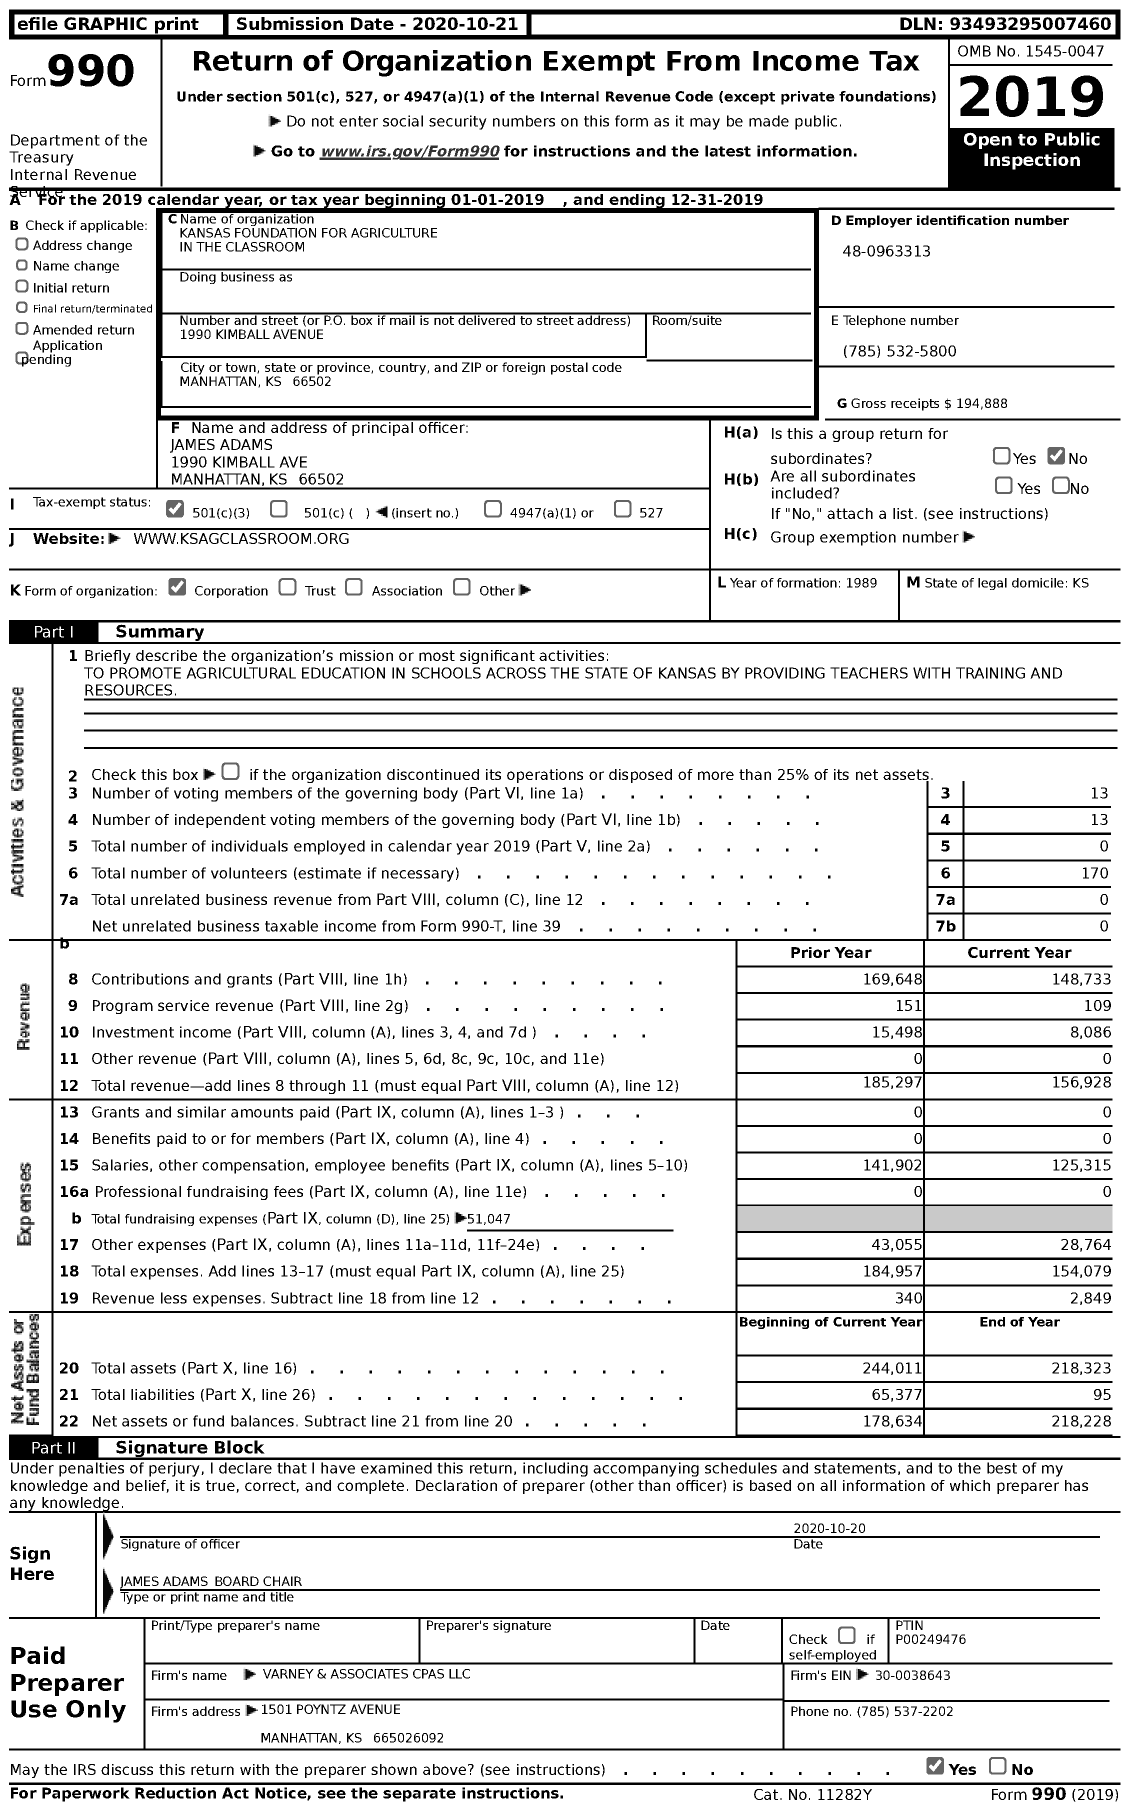 Image of first page of 2019 Form 990 for Kansas Foundation for Agriculture in the Classroom